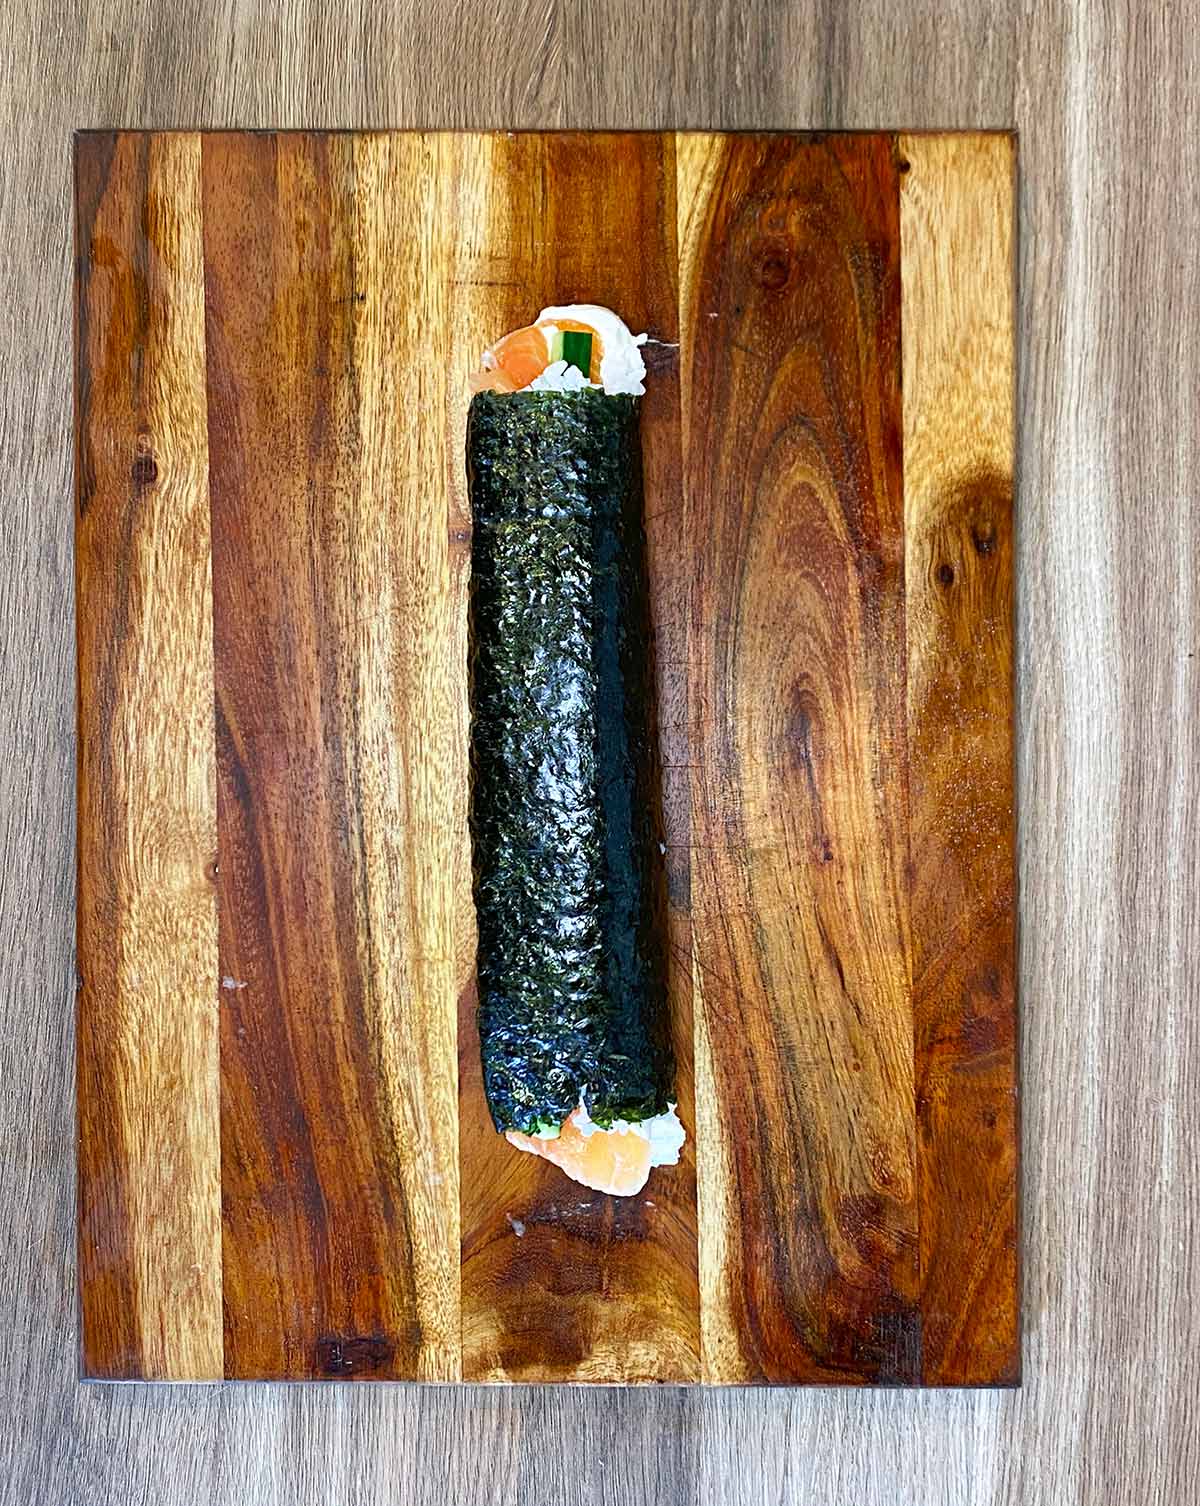 A fully rolled sushi roll in a full length.